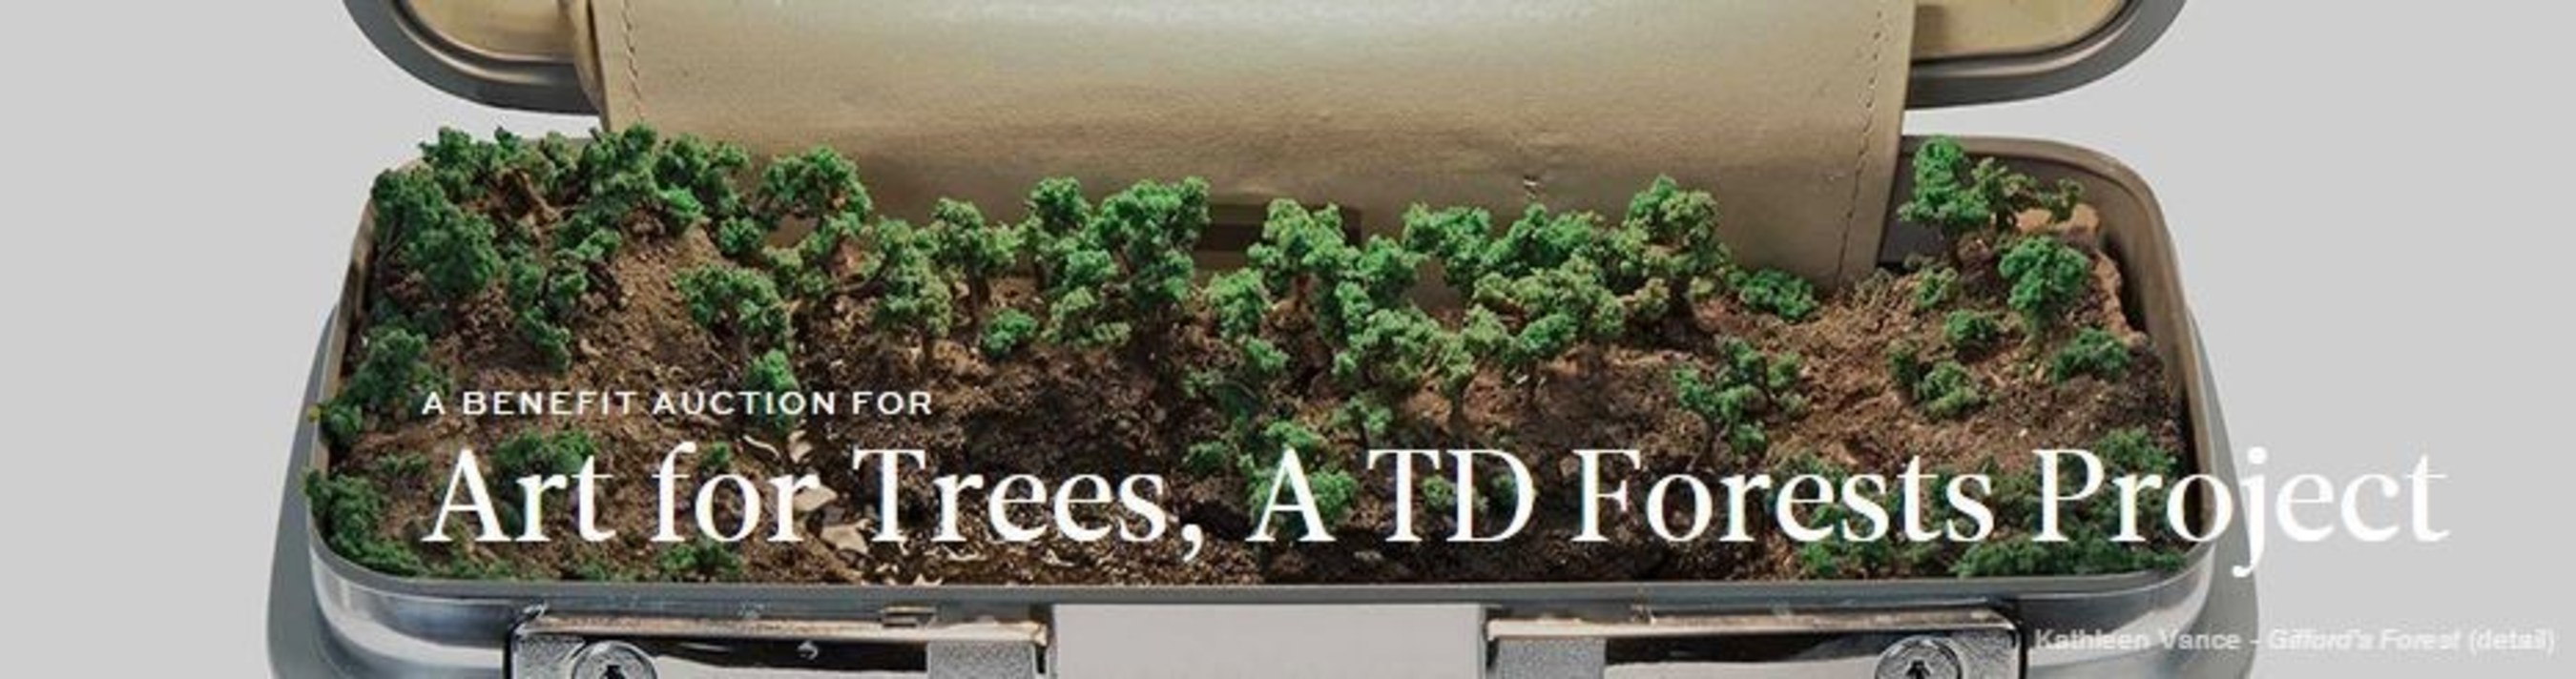 Inspired by the vision of a greener New York City, a group of ten artists have come together to donate their art for trees. All proceeds from "Art for Trees" will be equally distributed amongst New York Restoration Project, Friends of the High Line, Brooklyn Botanic Garden and Trees New York.